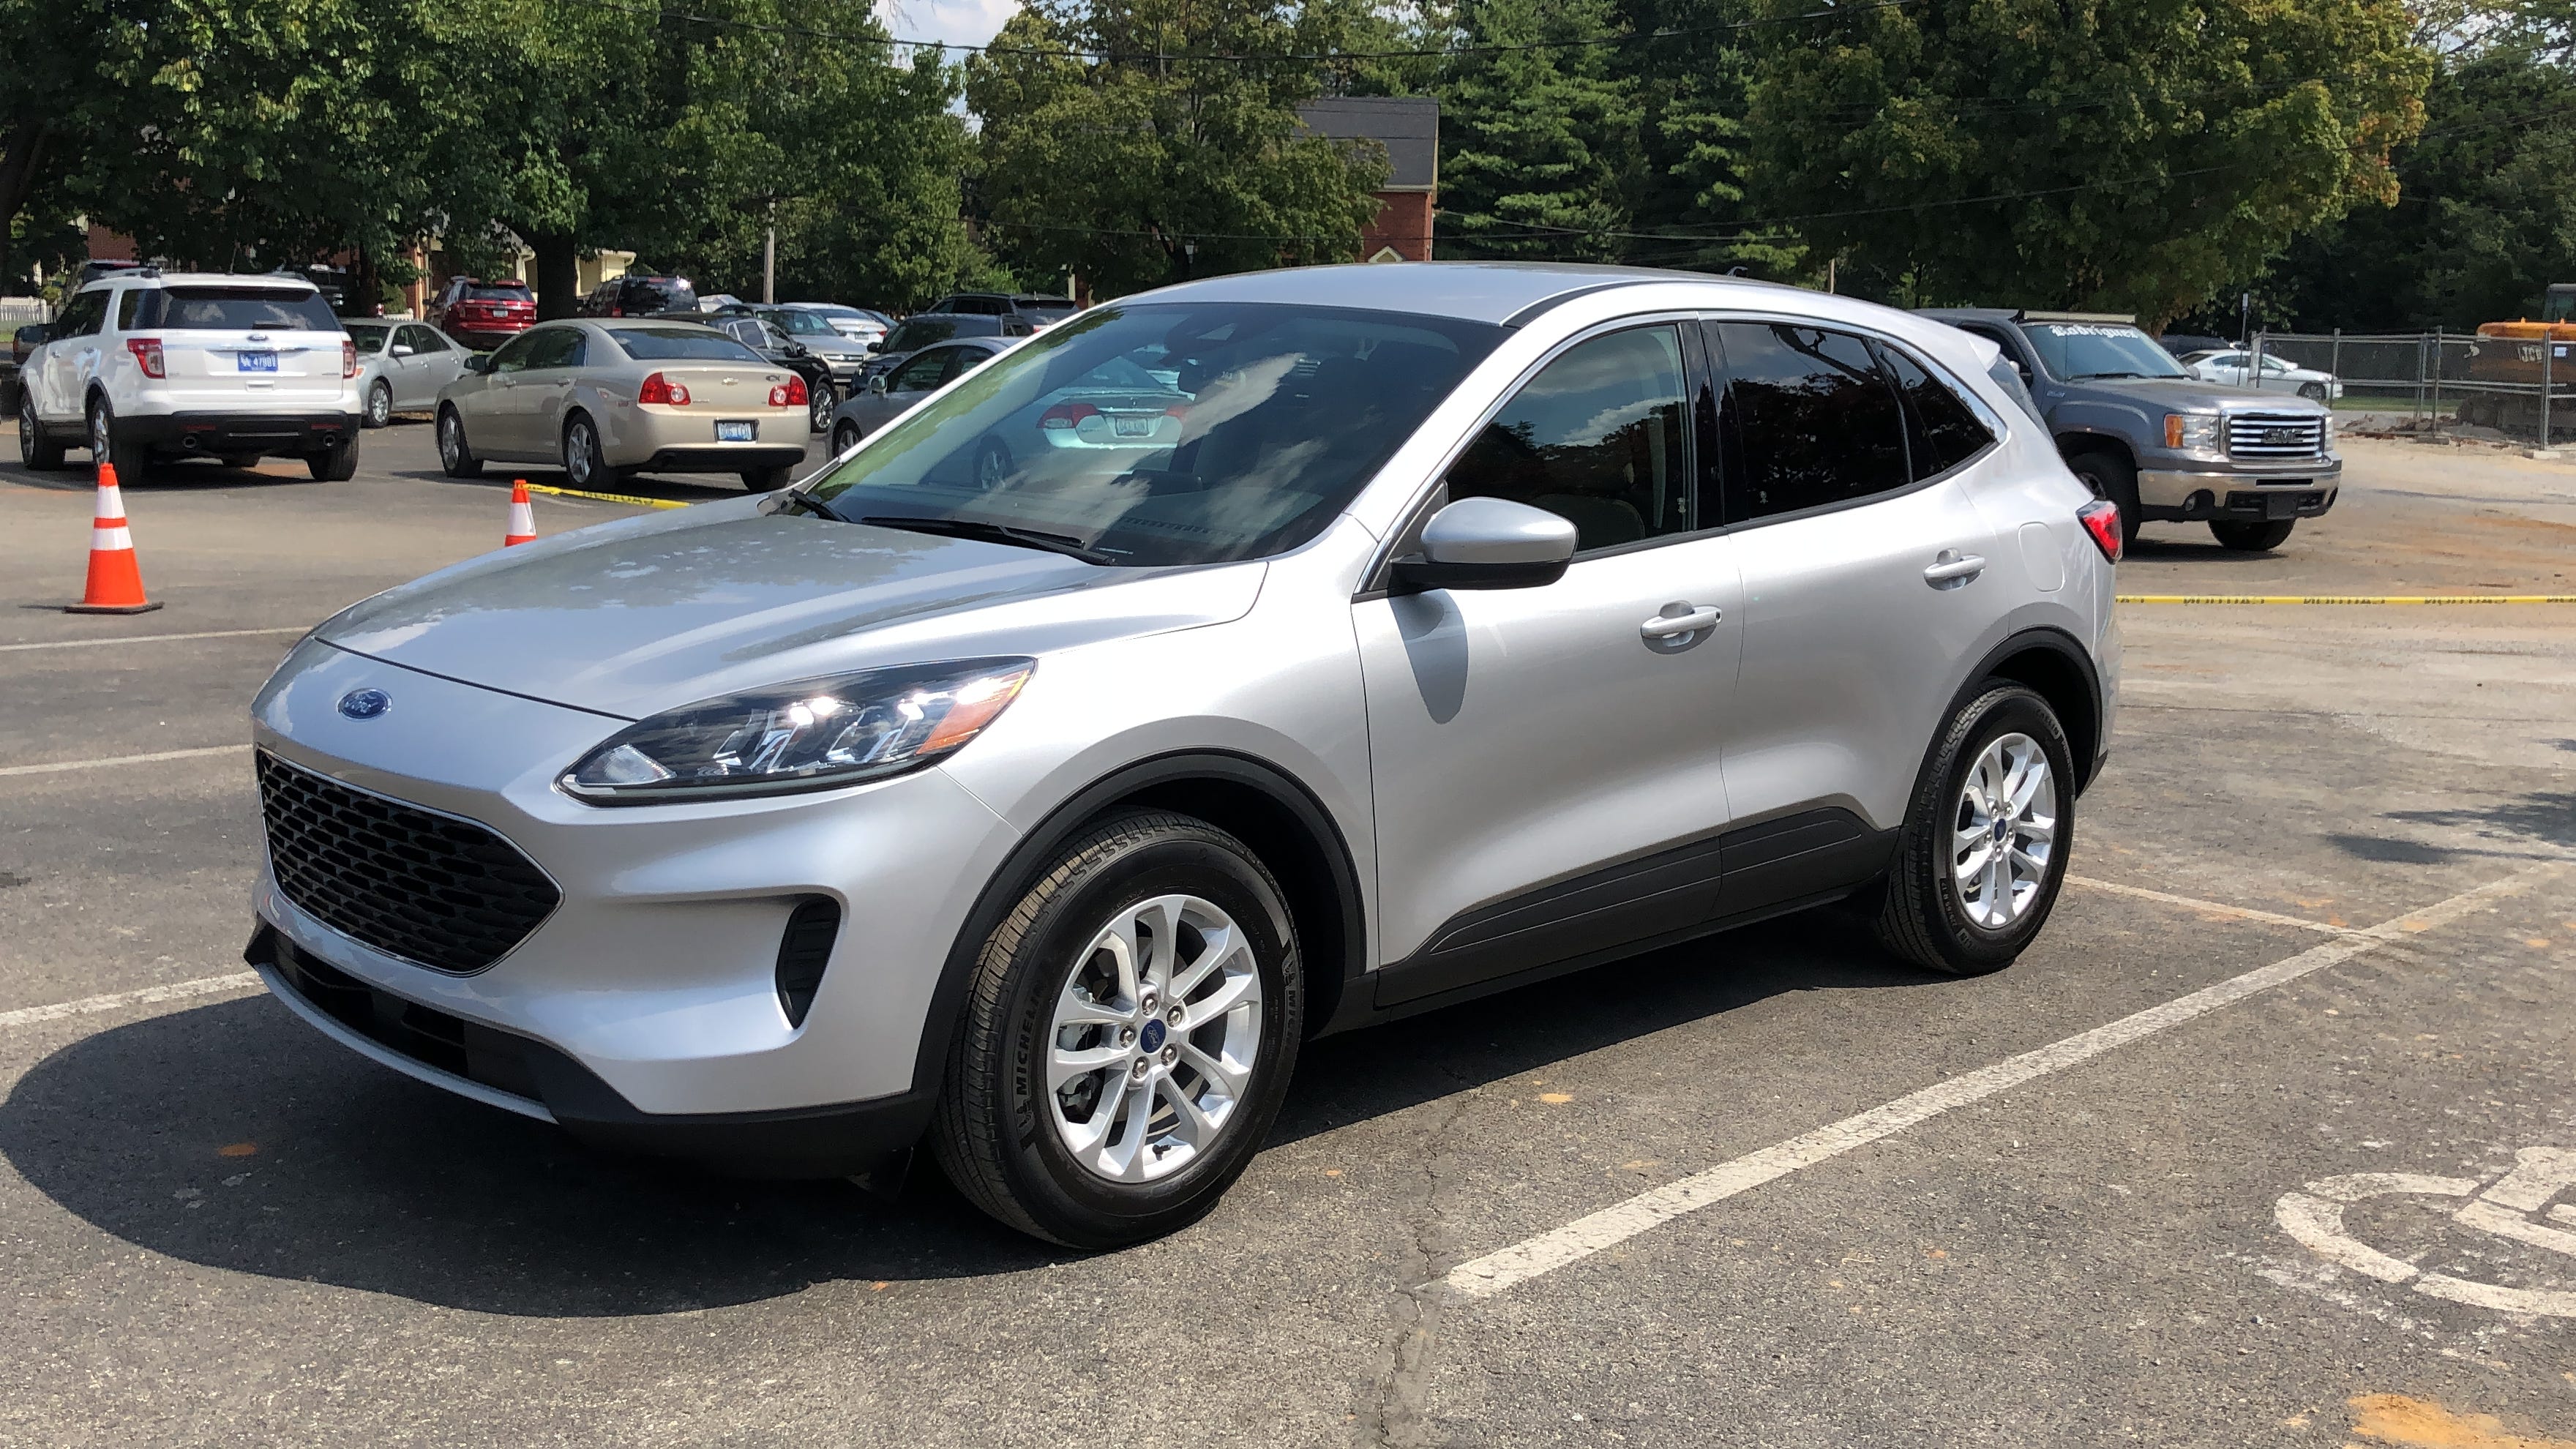 2020 Ford Escape review: Buyers will love hybrid, features, safety